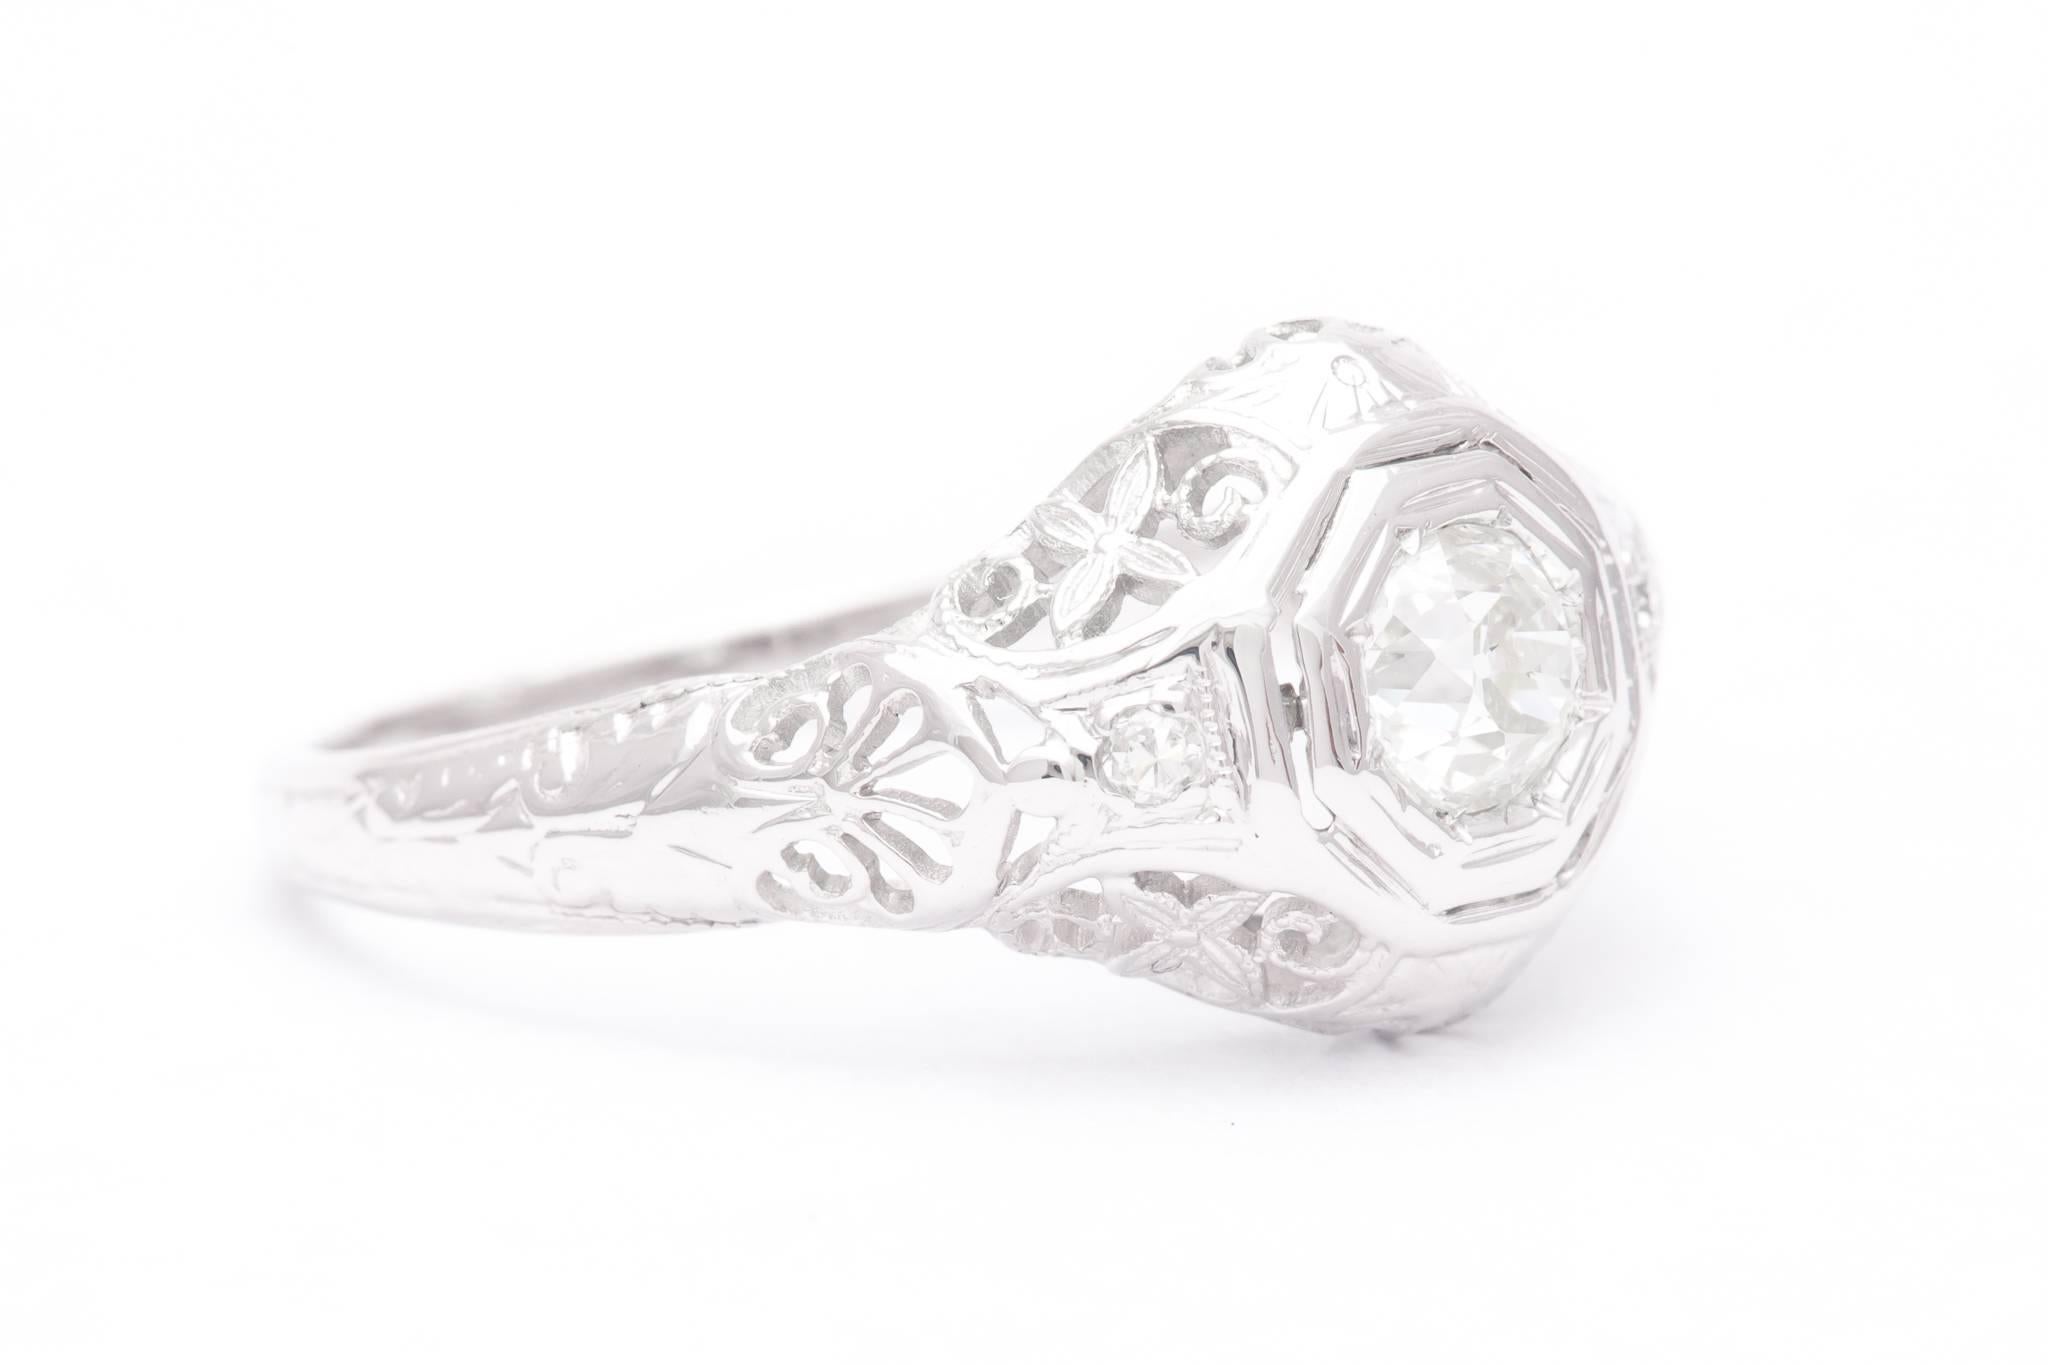 An art deco period diamond engagement ring in 18 karat white gold.  Boasting hand pierced filigree work throughout along with traditional art deco hand engraving, this ring is centered by an antique 0.50 carat European cut diamond.

Grading as H